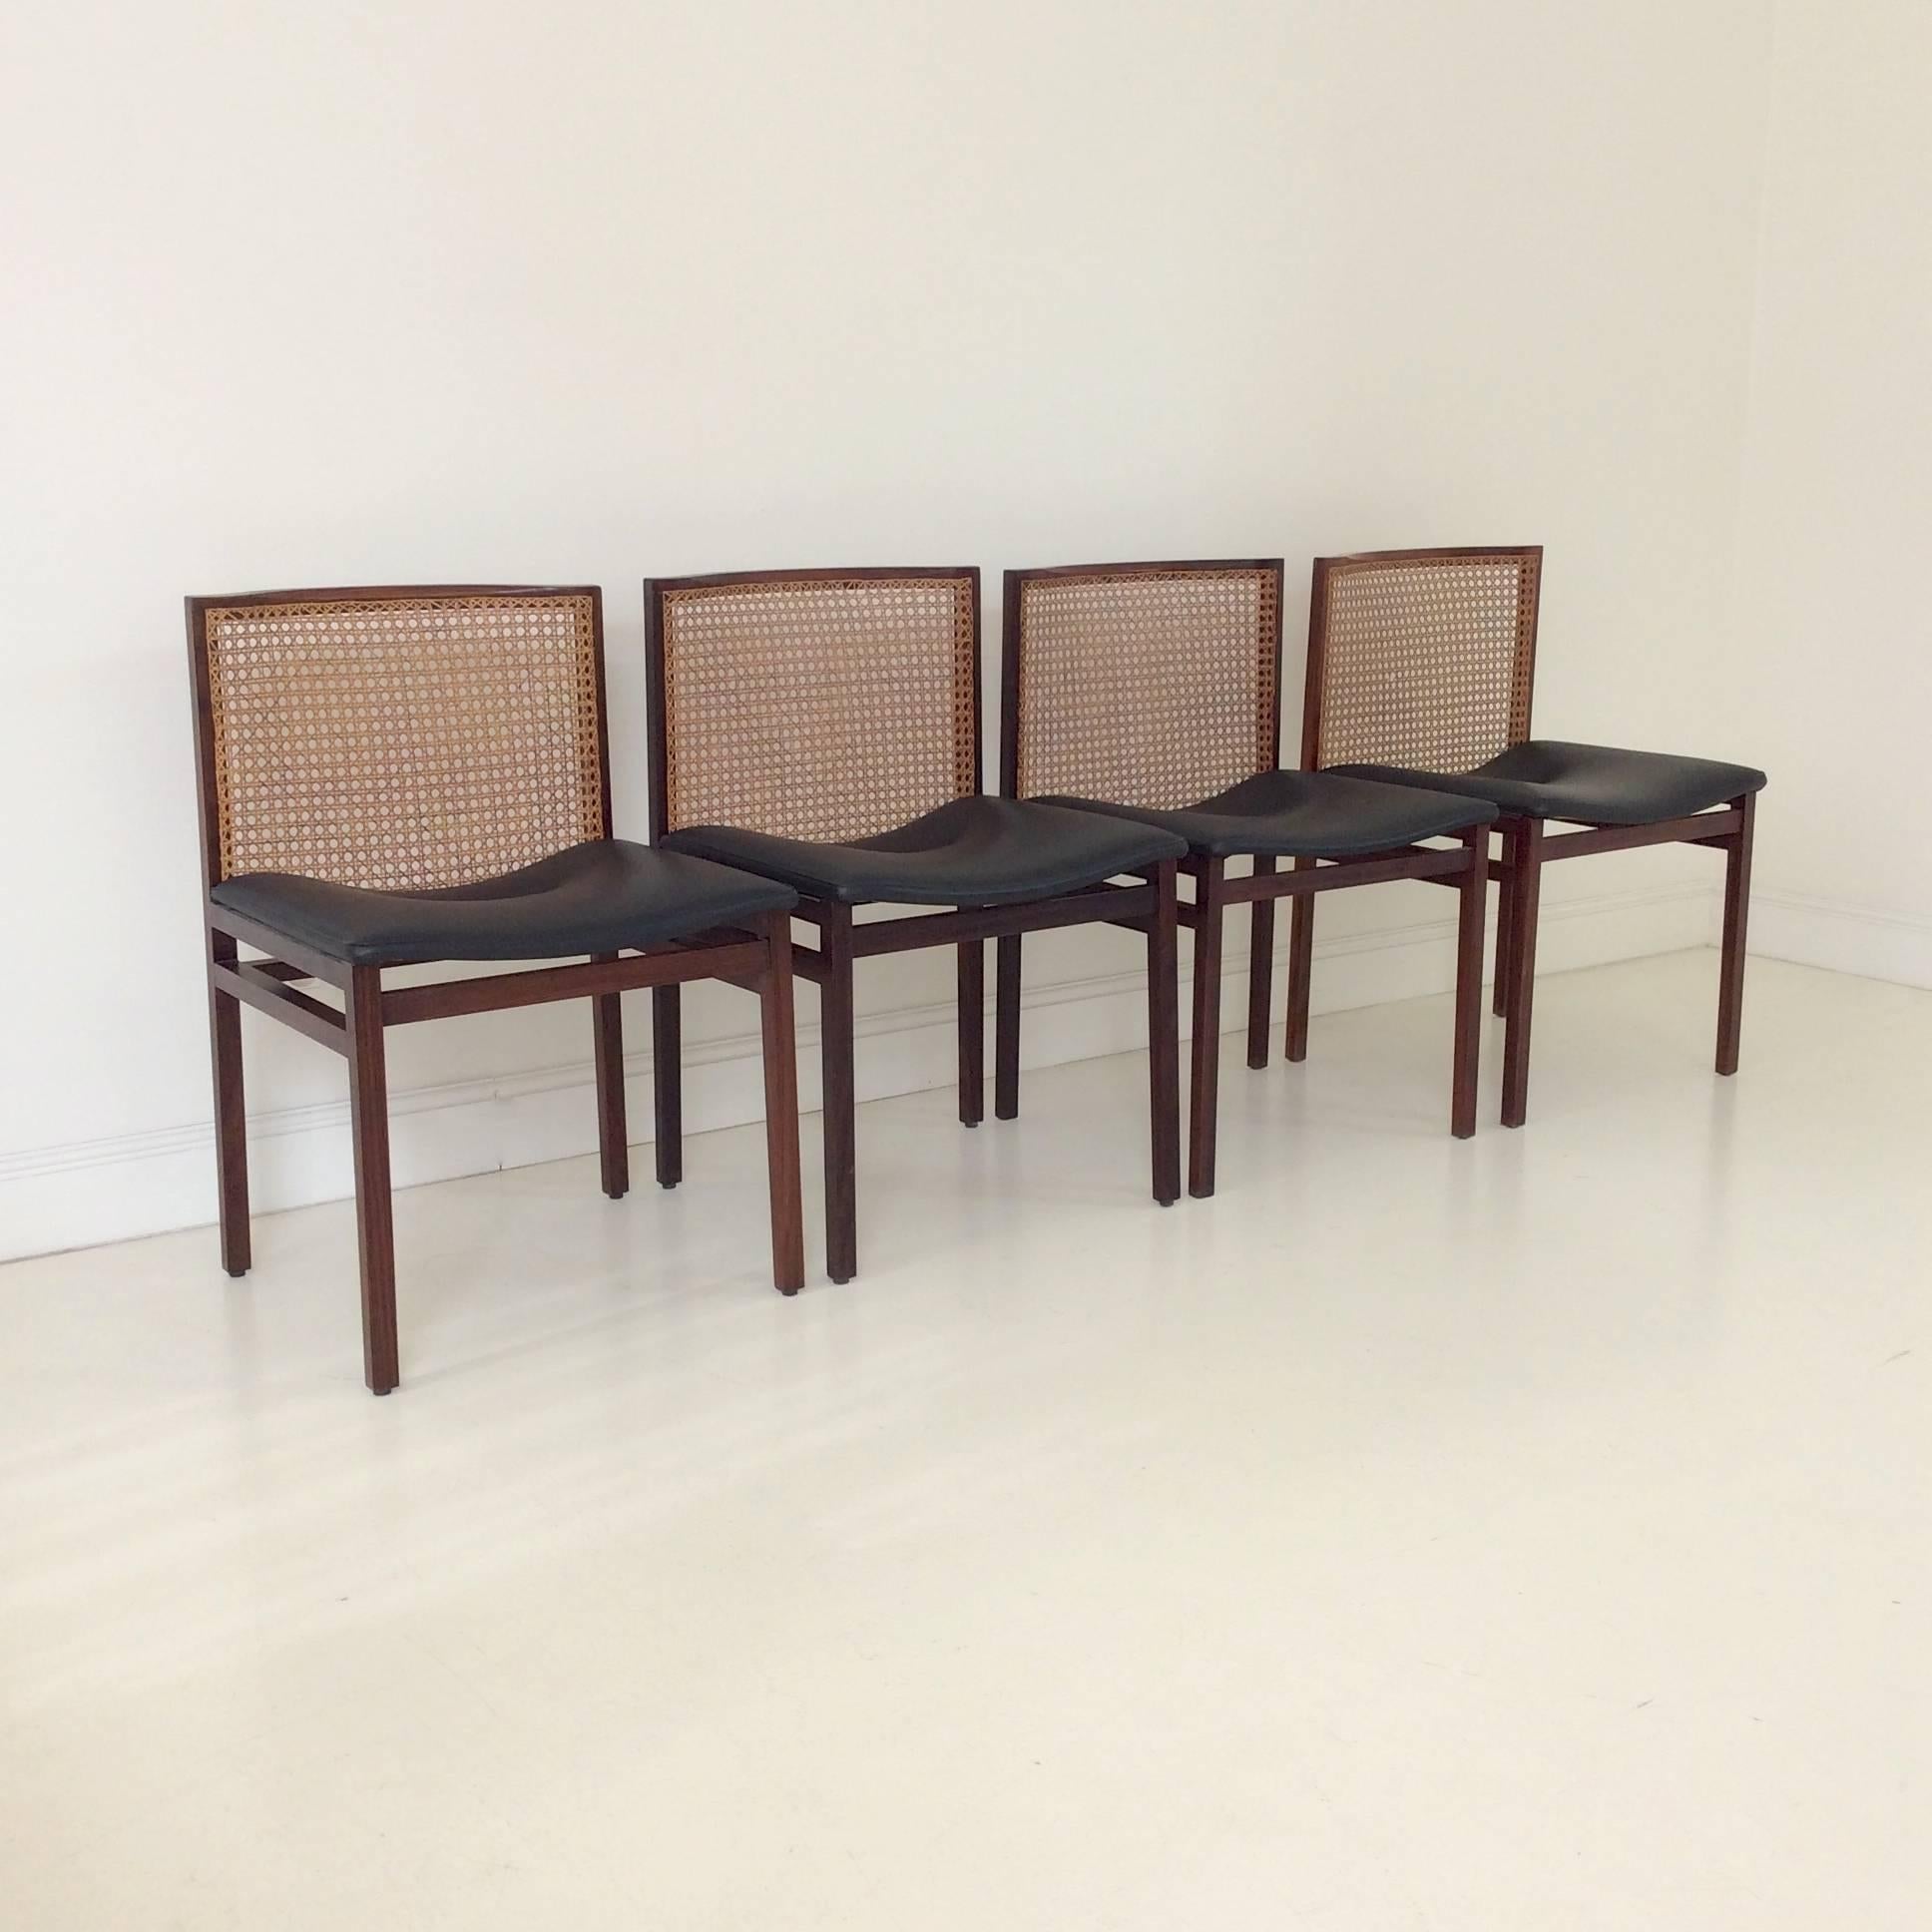 Set of four Scandinavian dining chairs, circa 1960, Denmark
Solid rosewood, black skai and cane.
Dimensions: 76 cm H, 44 cm seat H, 49 cm W, 50 cm D.
Good original condition.